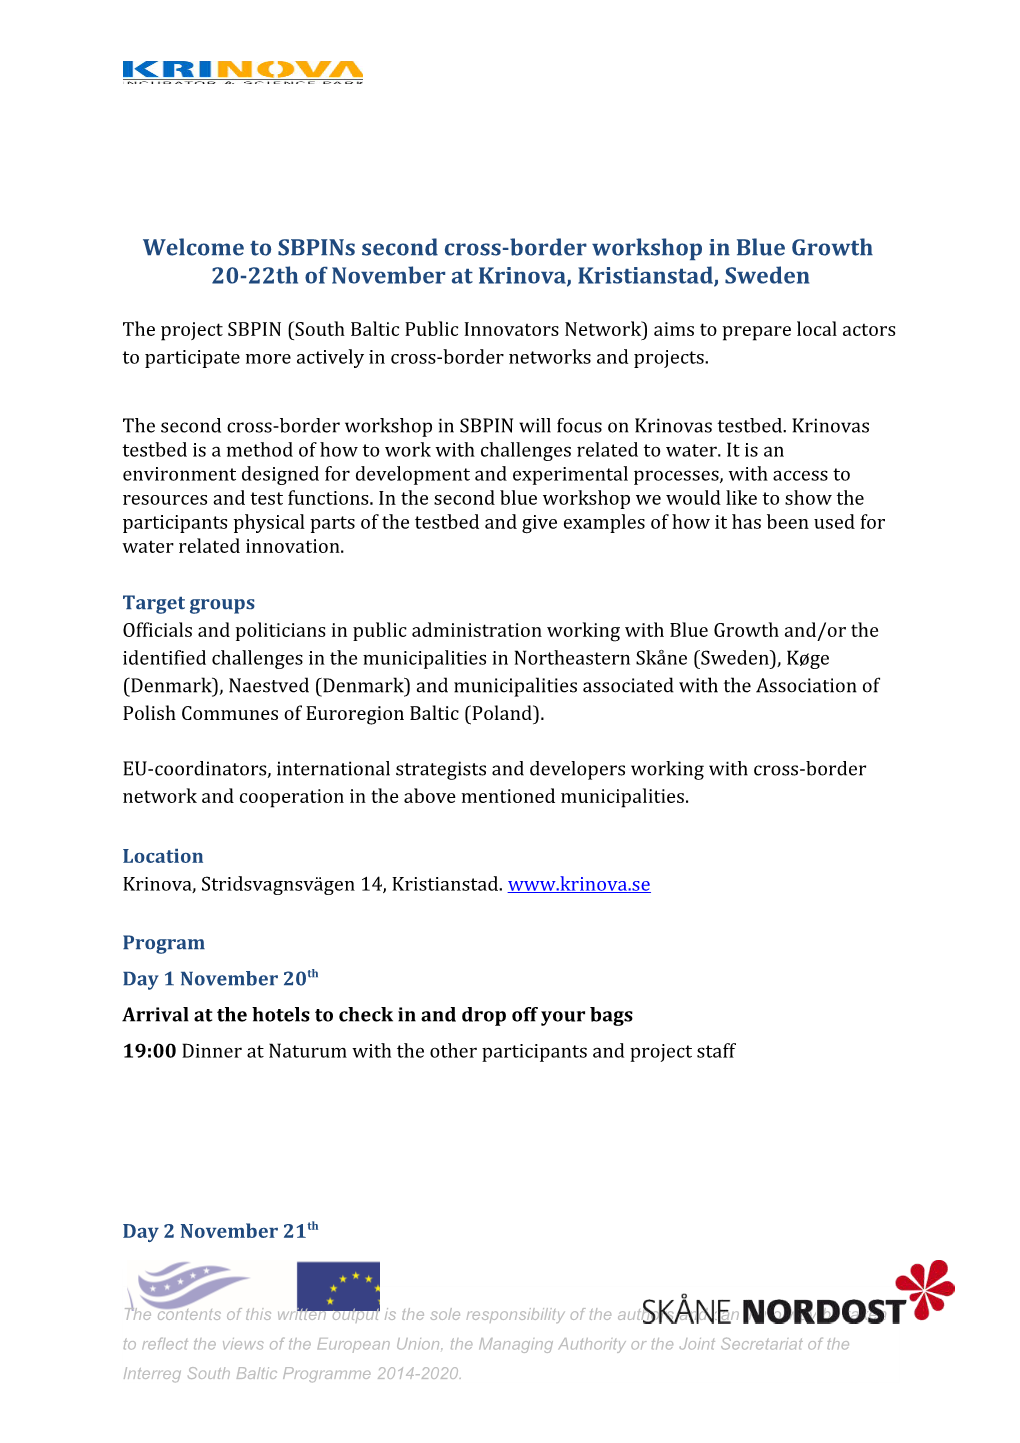 Welcome to Sbpins Second Cross-Border Workshop in Blue Growth 20-22Th of Novemberat Krinova